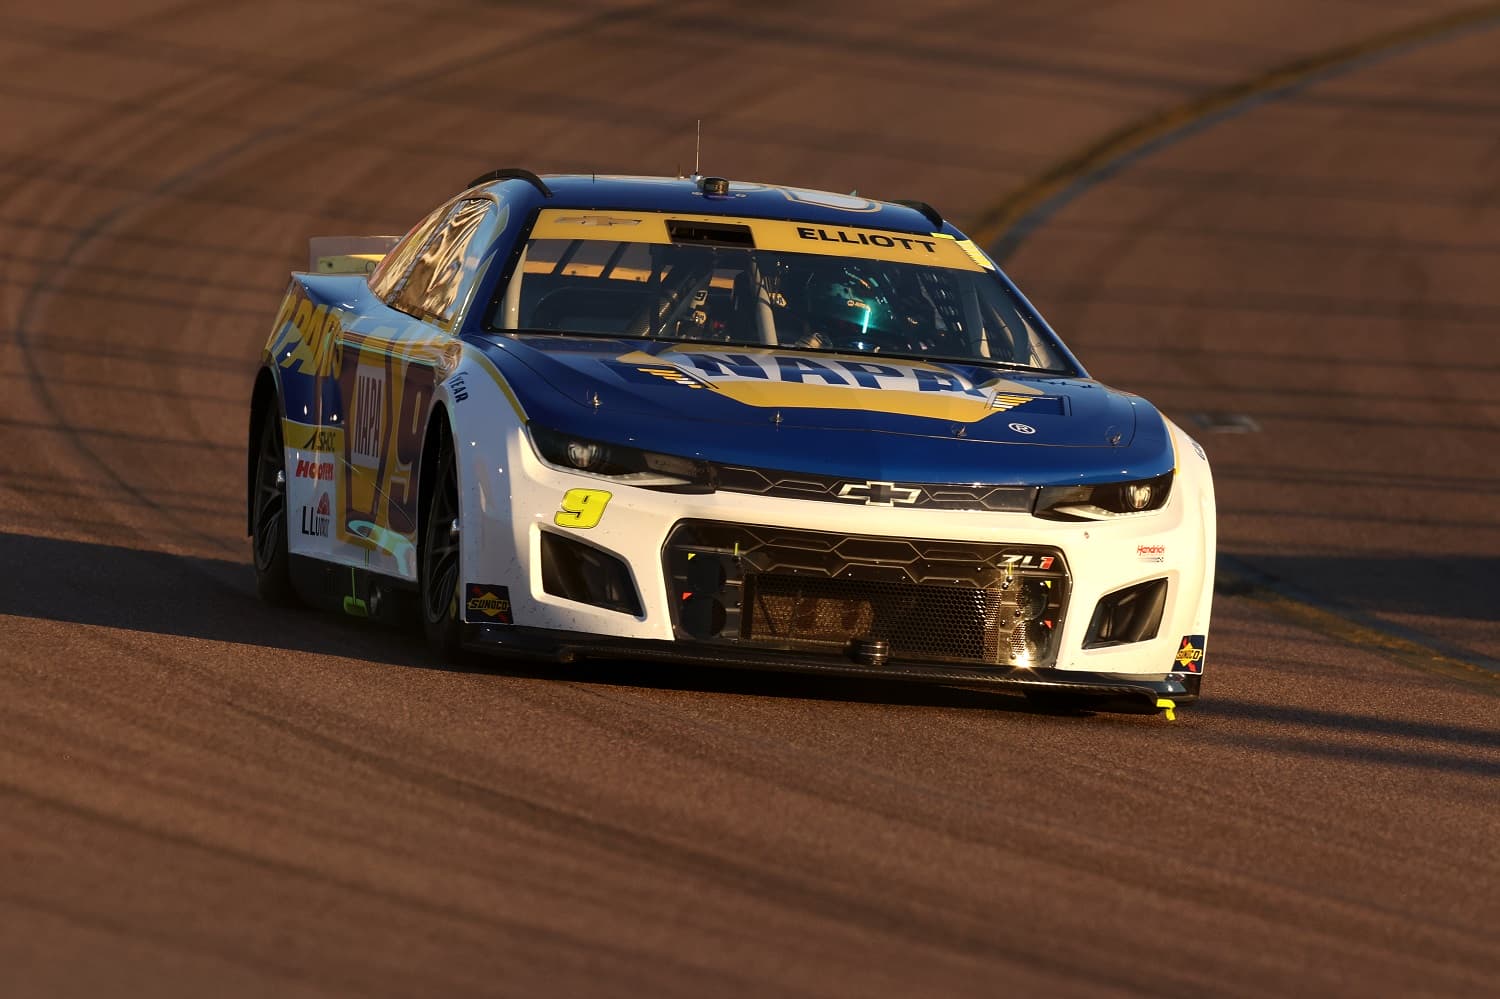 Chase Elliott, driver of the #9 NAPA Auto Parts Chevrolet Camaro, drives during practice for the NASCAR Cup Series Championship at Phoenix Raceway on Nov. 4, 2022.